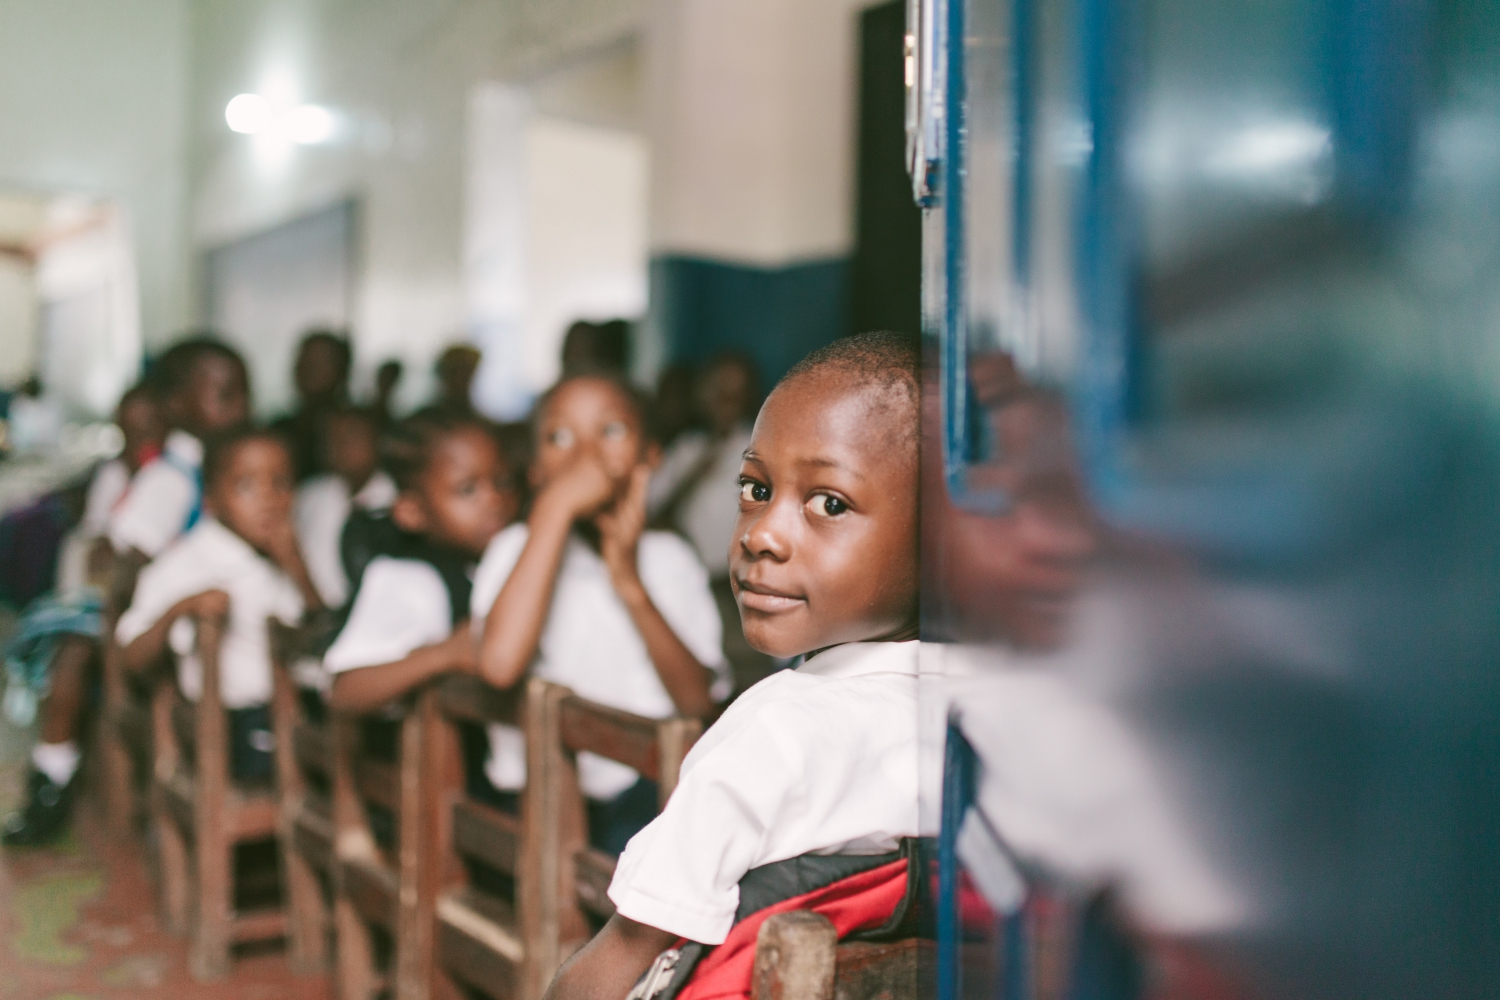 Student in Liberia attending public education institution in Africa